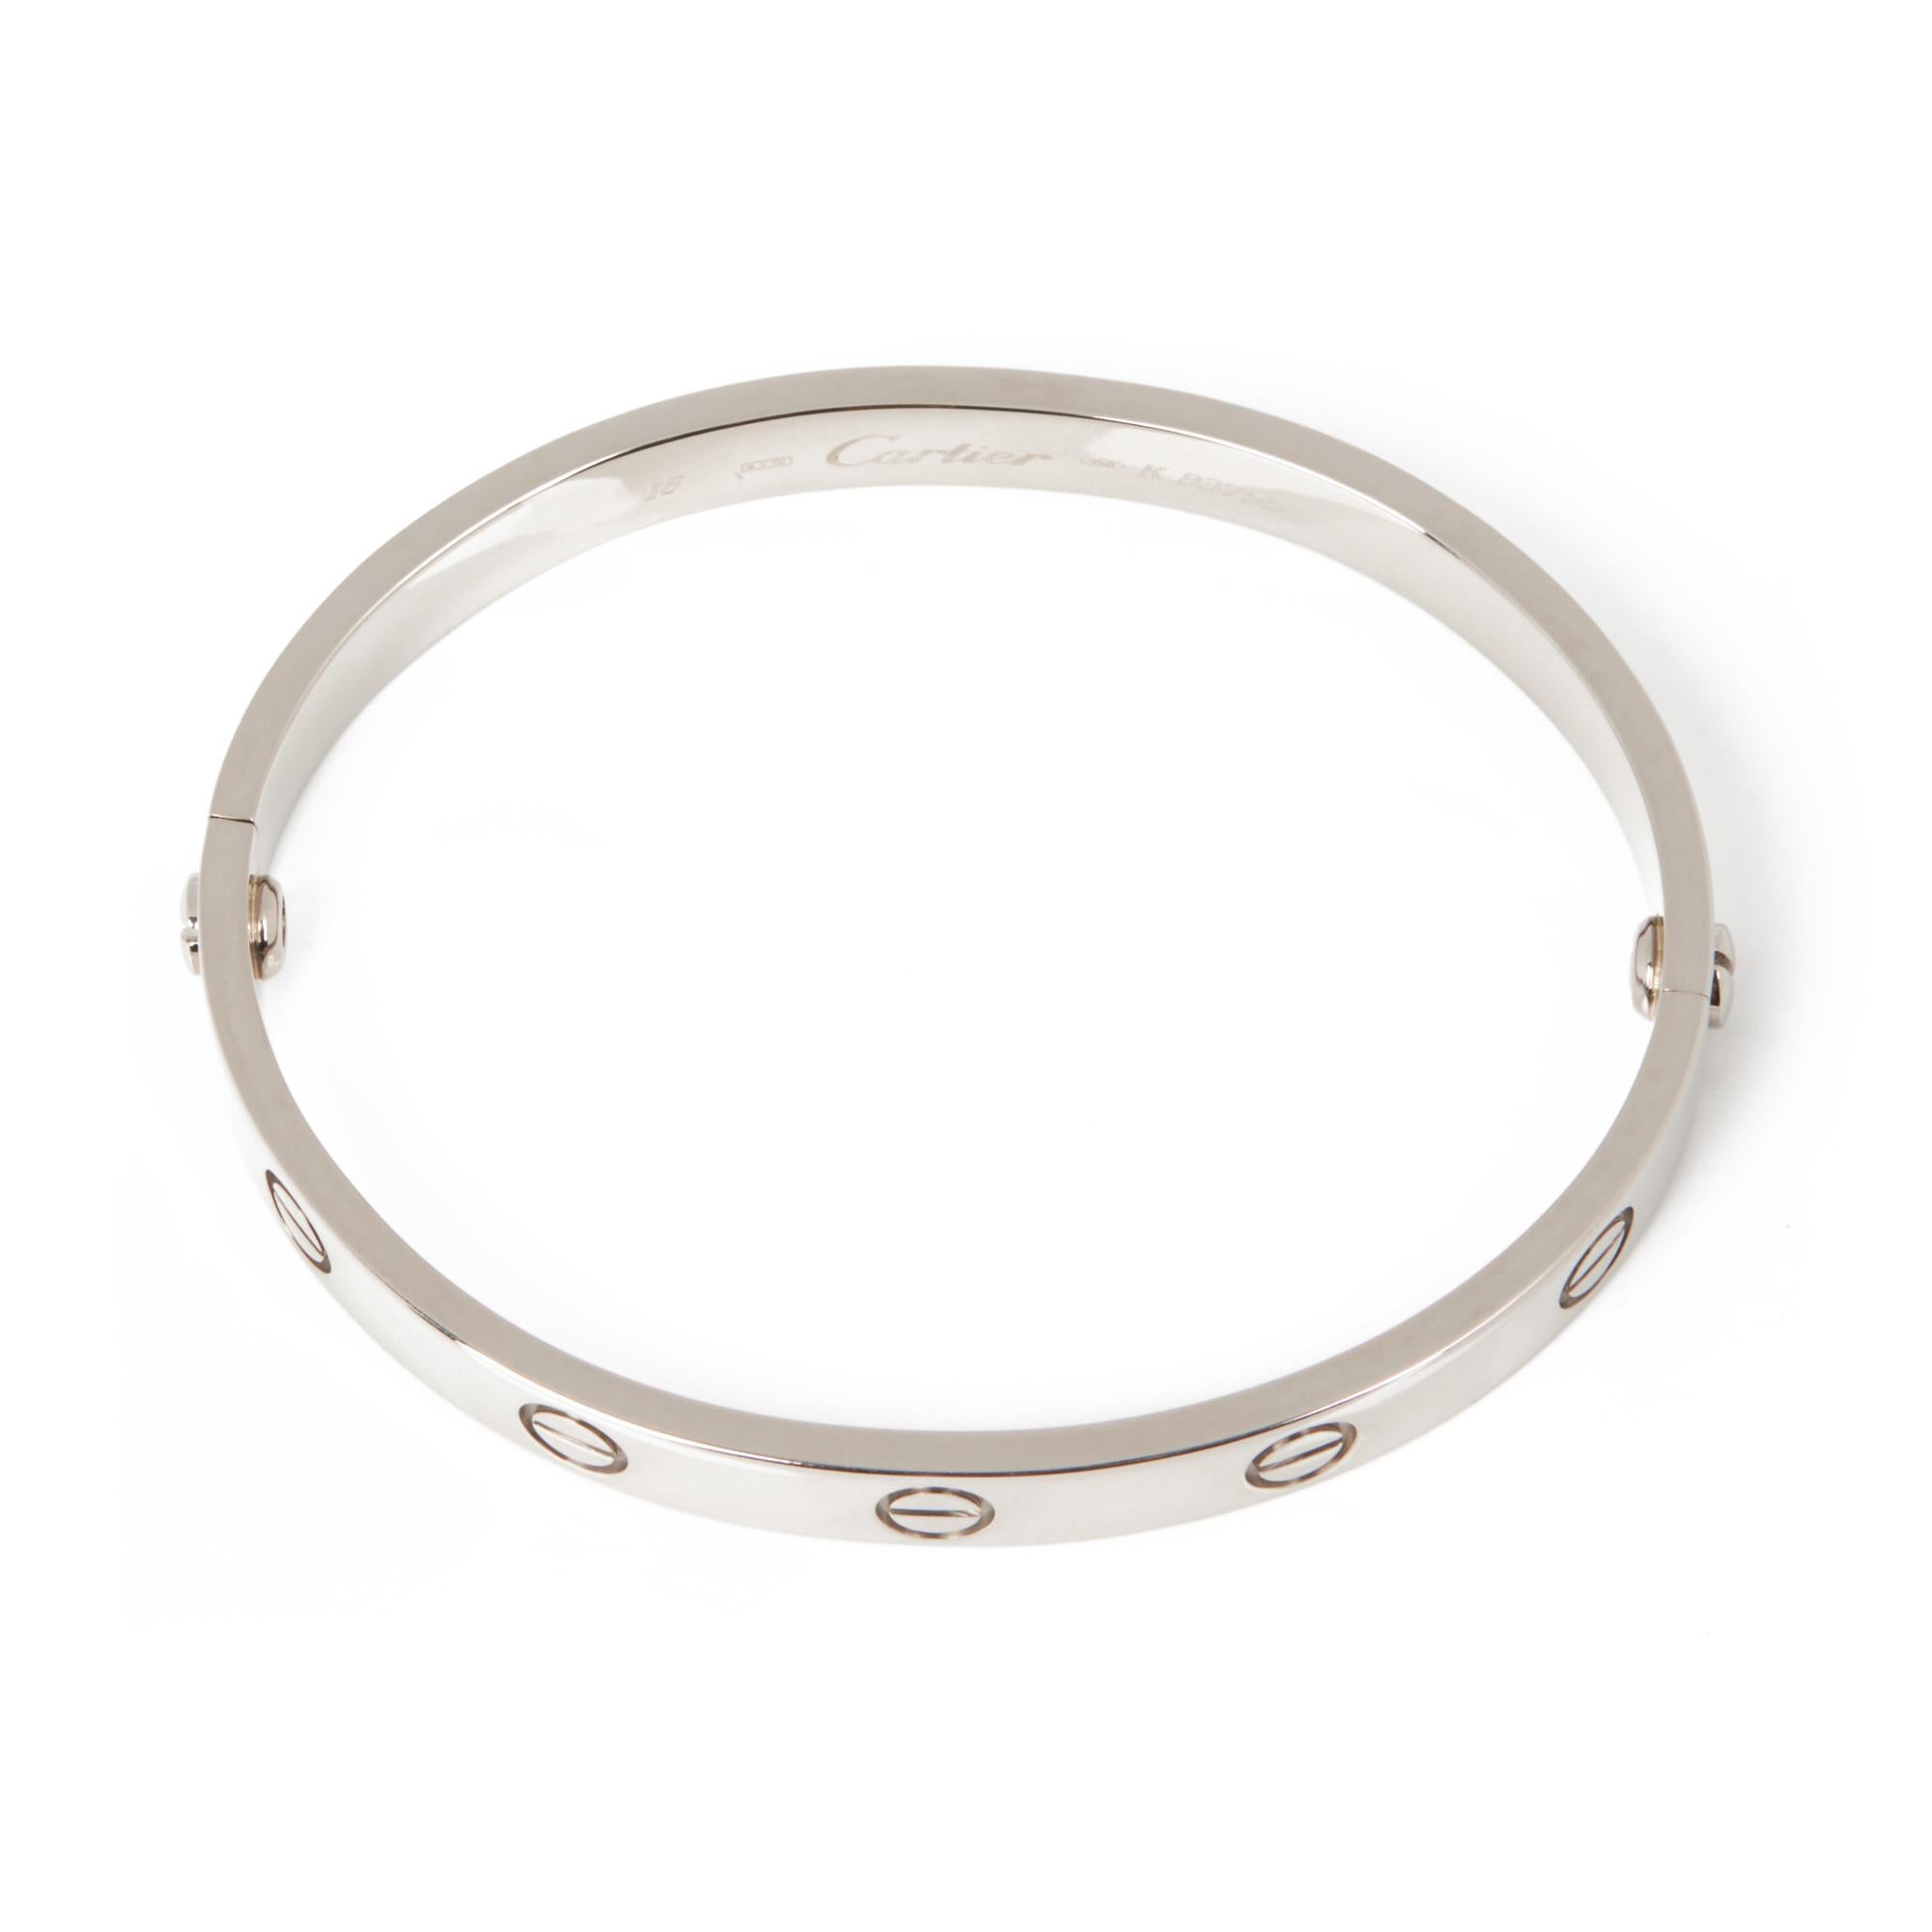 Cartier 18ct White Gold Love Bangle

Brand- Cartier
Model- Love Bangle
Product Type- Bracelet
Serial Number- K8****
Accompanied By- Cartier Pouch, Service Papers, Screwdriver
Material(s)- 18ct White Gold

Bracelet Length- 16cm
Bracelet Width-